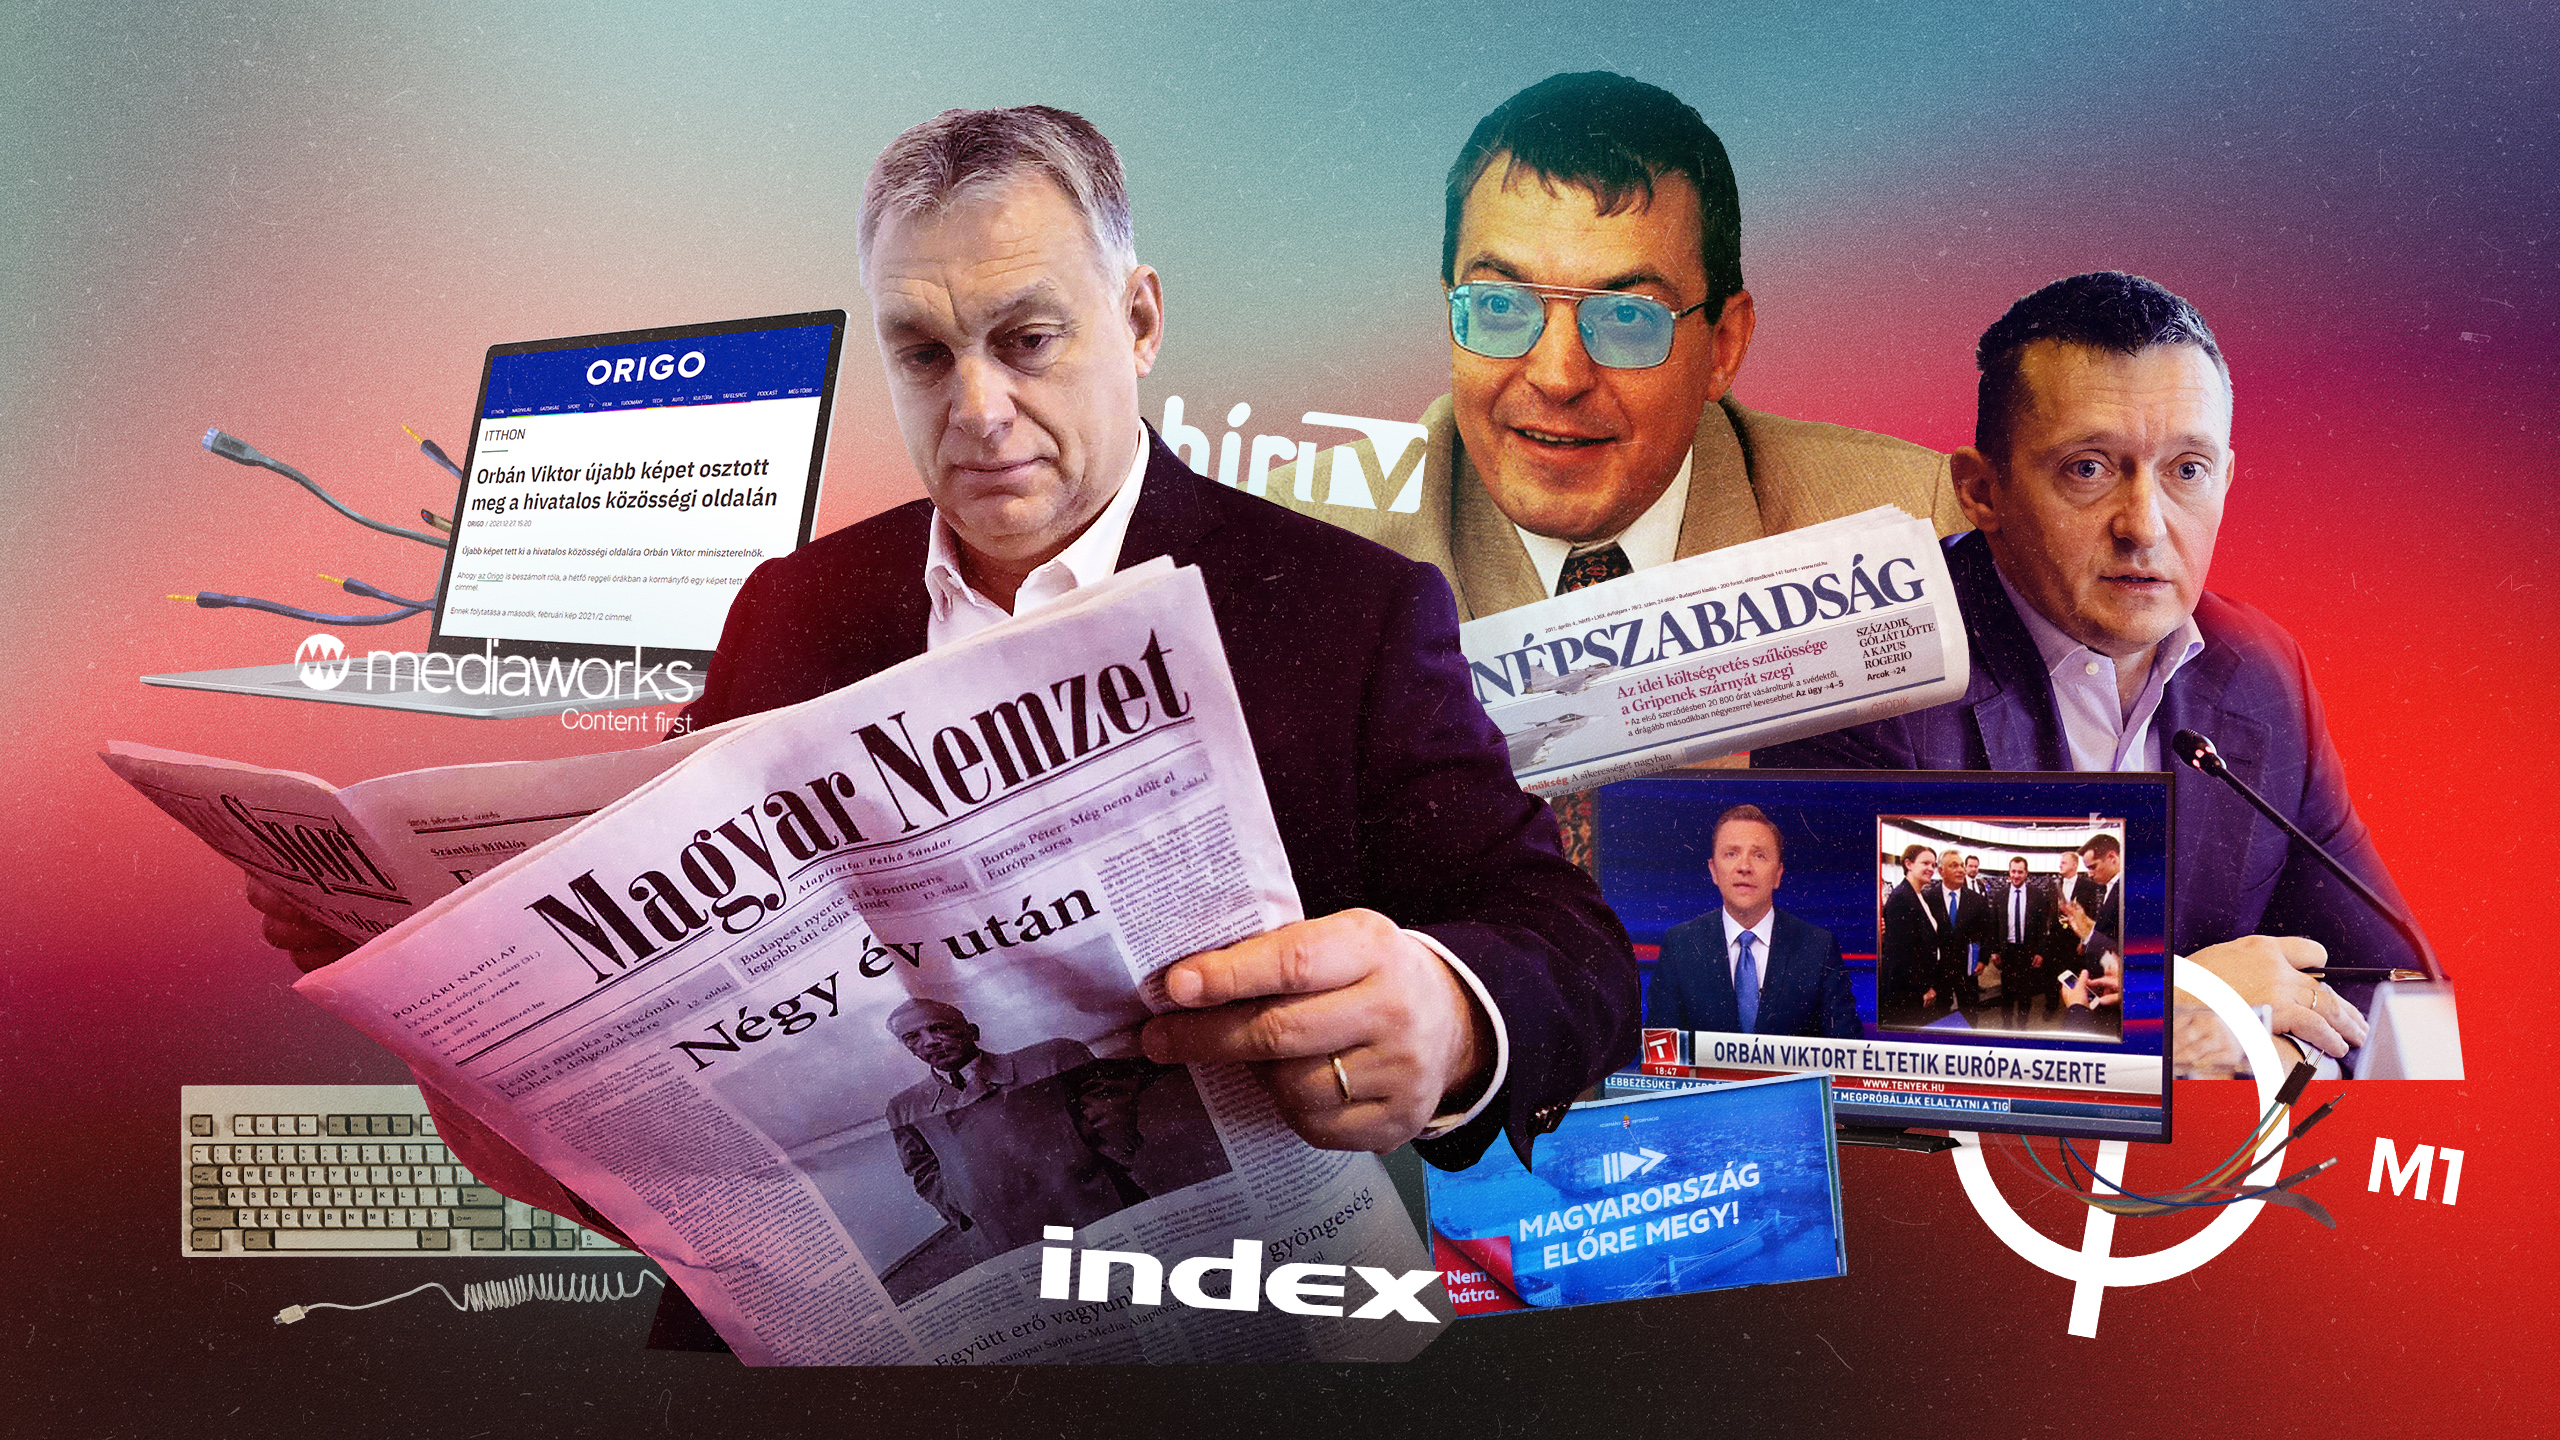 The Art of Media War - This is how Viktor Orbán captured the free press in Hungary